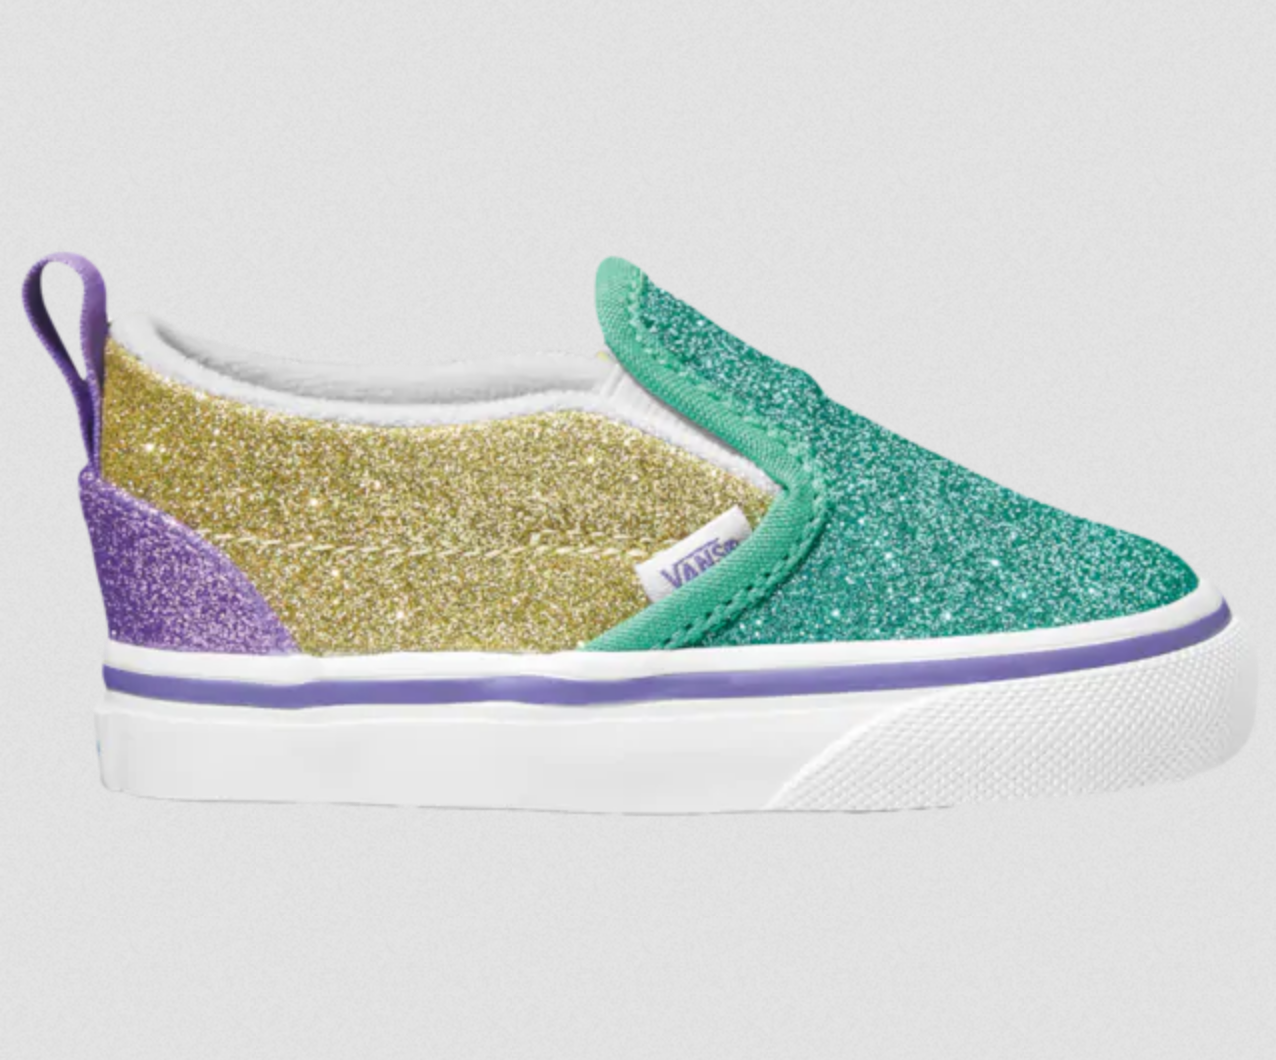 mermaid shoes for toddlers